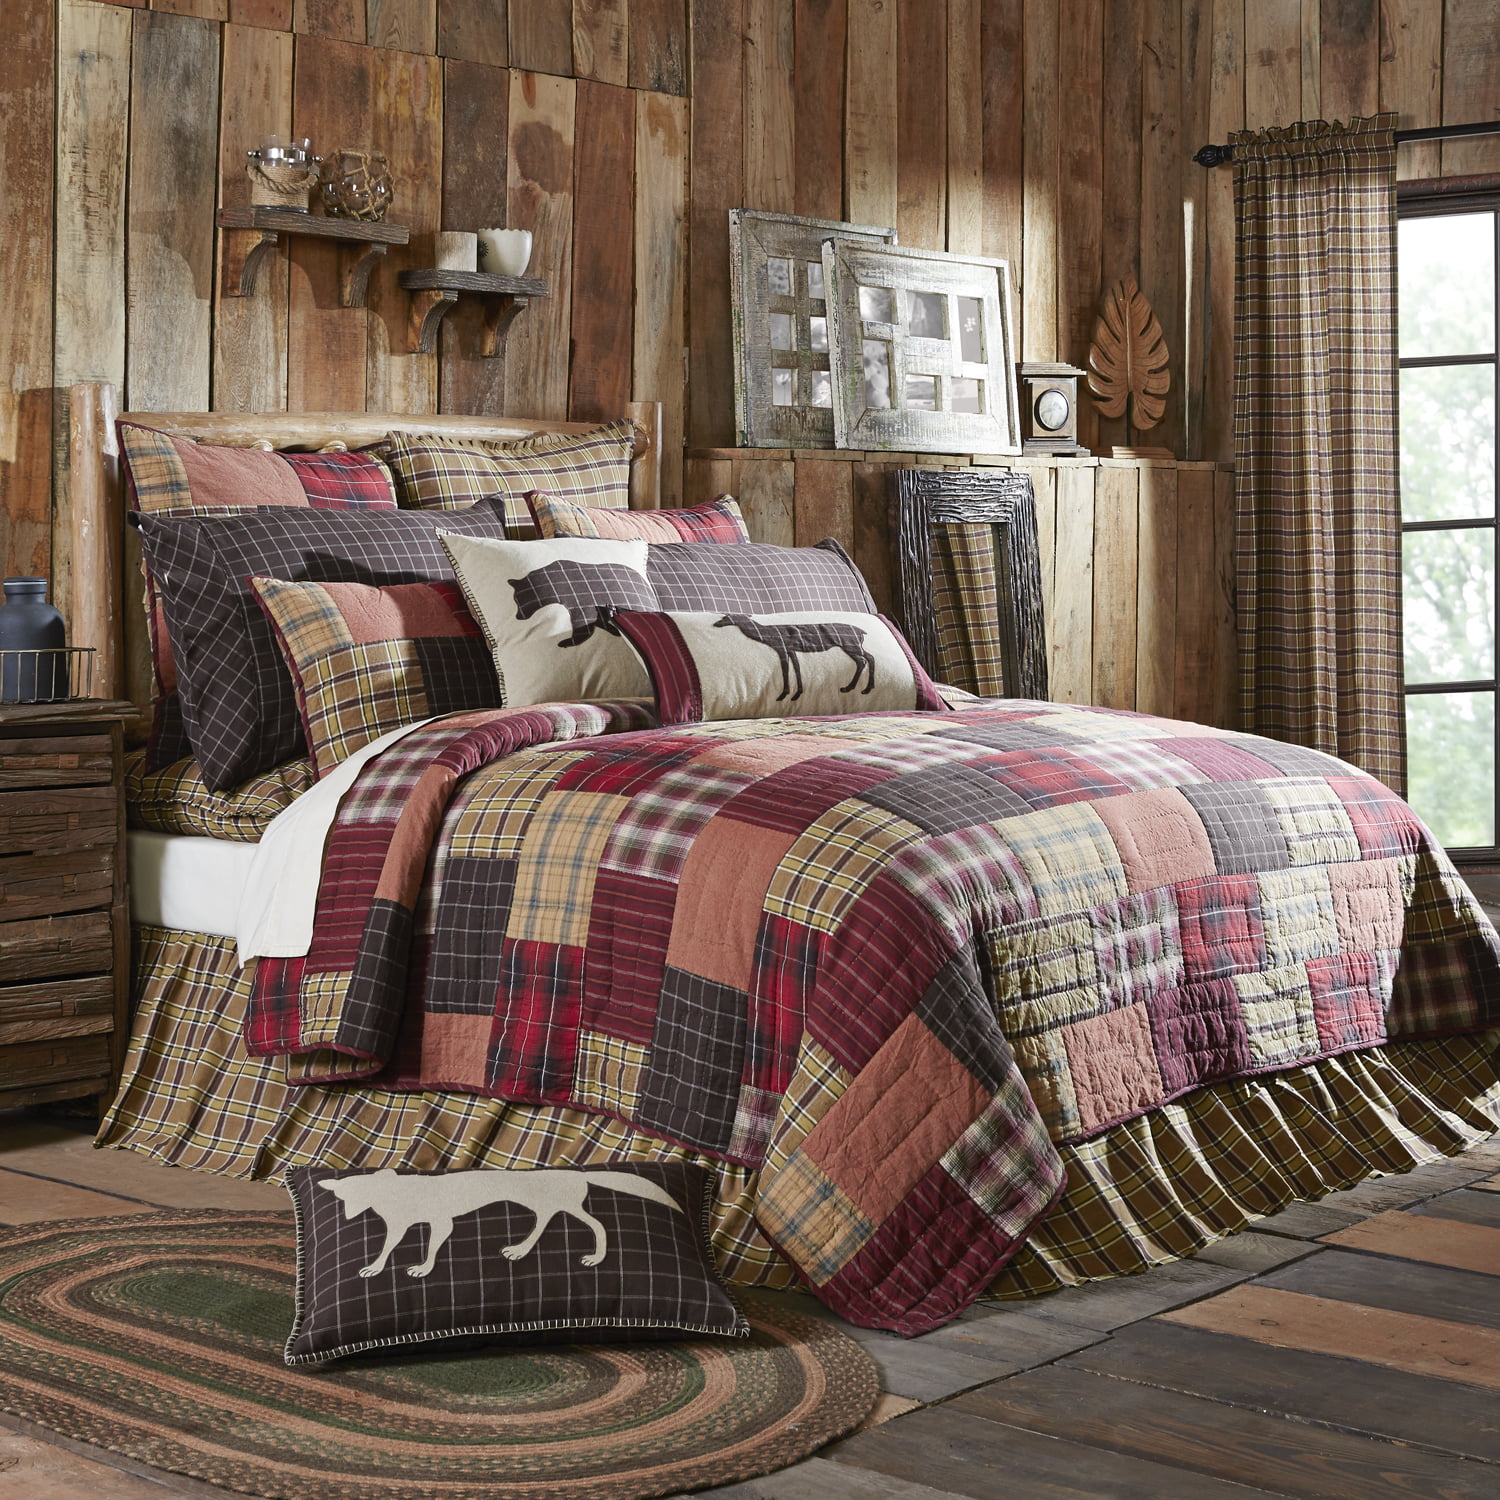 Details about   VHC Brands Rustic King Sham Red Patchwork Tacoma Cotton Hand Bedroom Decor 